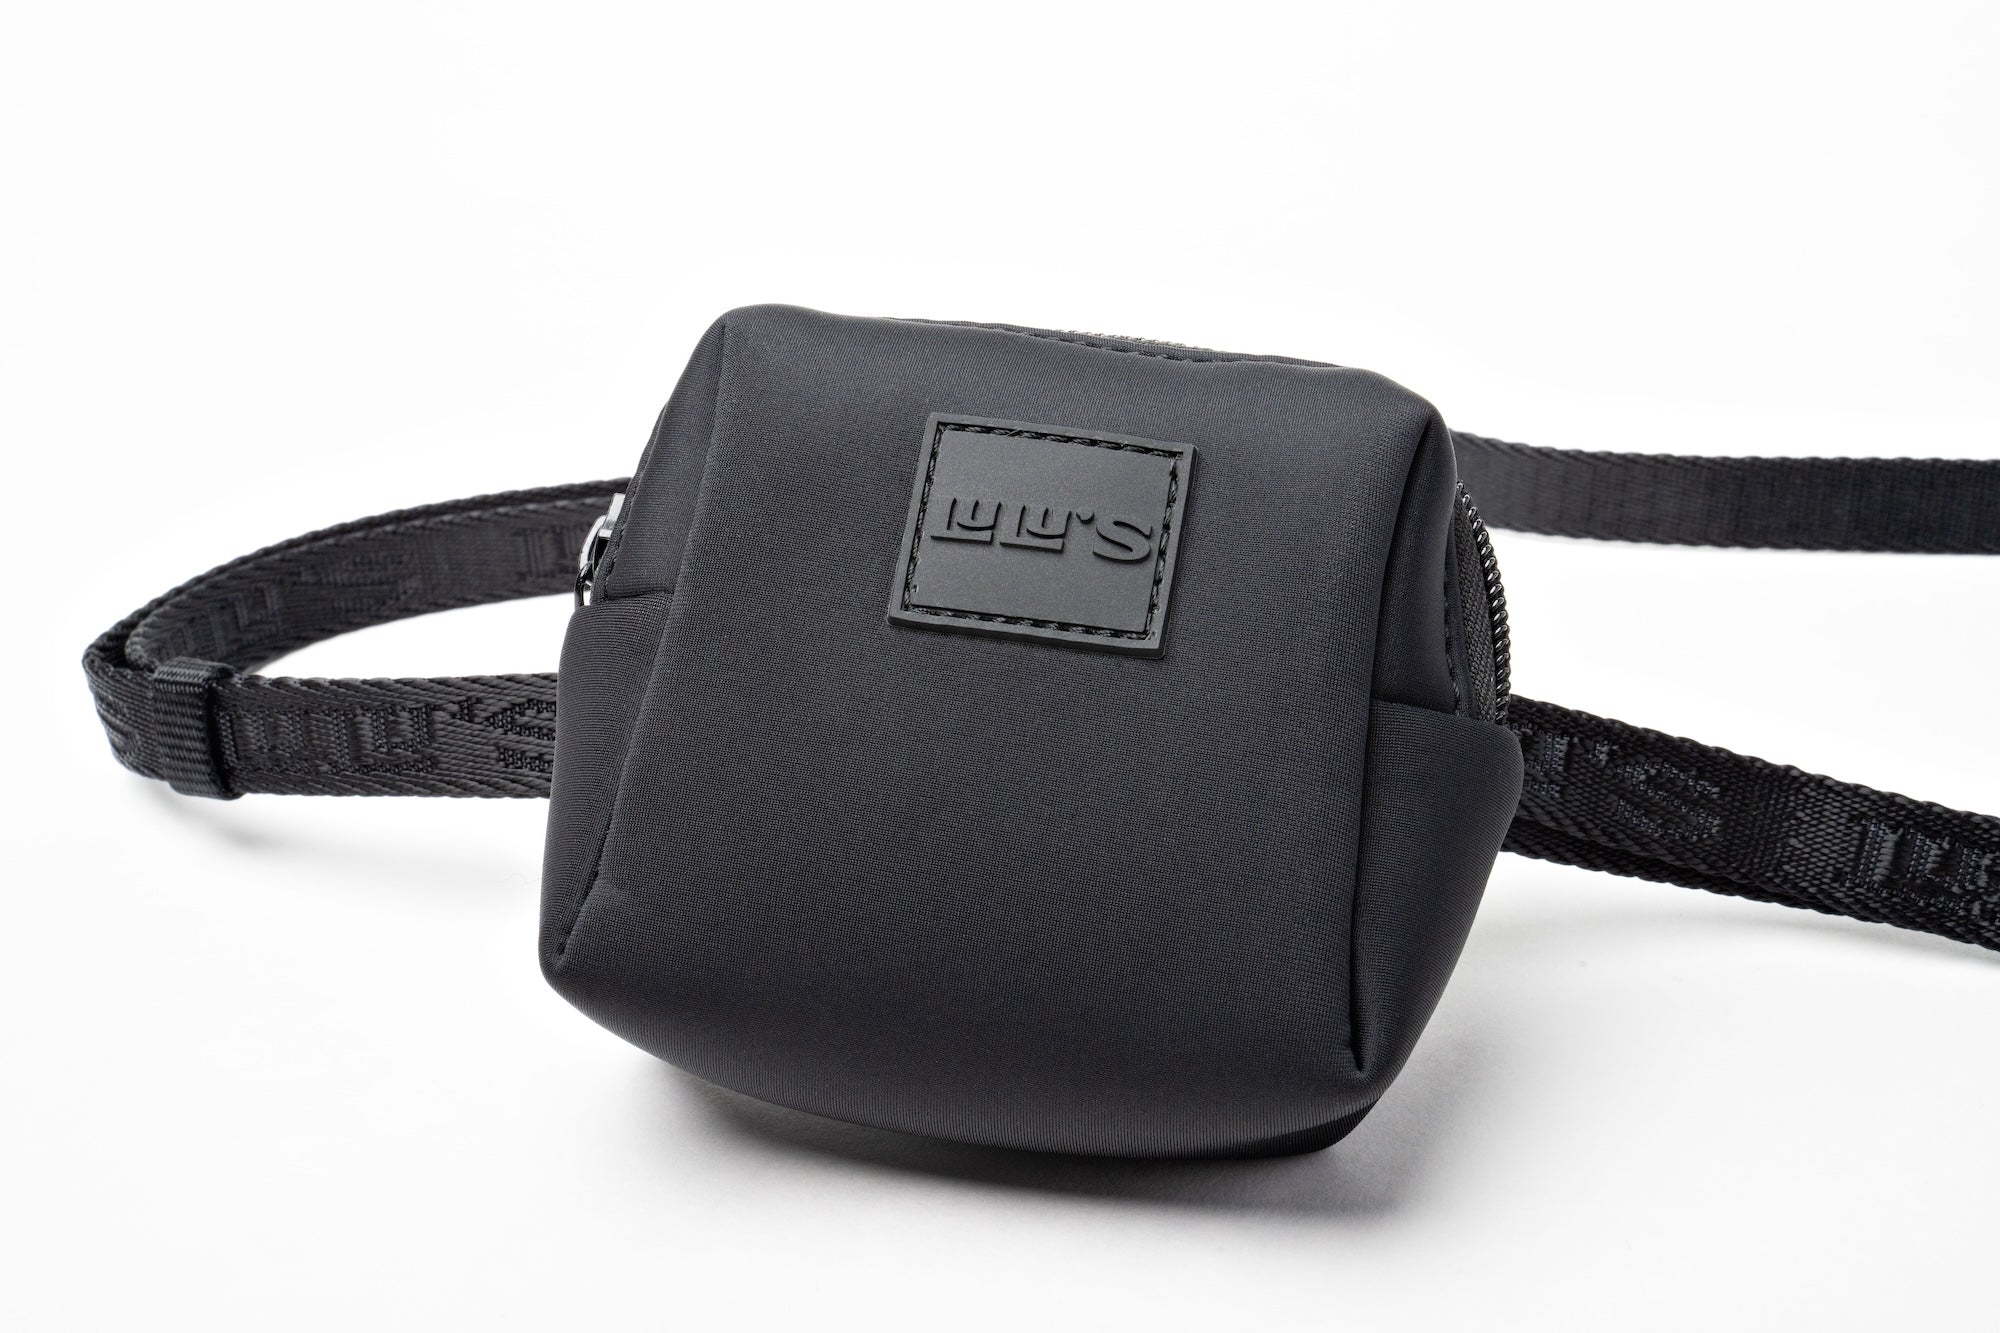 Close-up of Lulu's Midnight Black waste bag holder, featuring a sleek design with a secure zipper and adjustable strap.